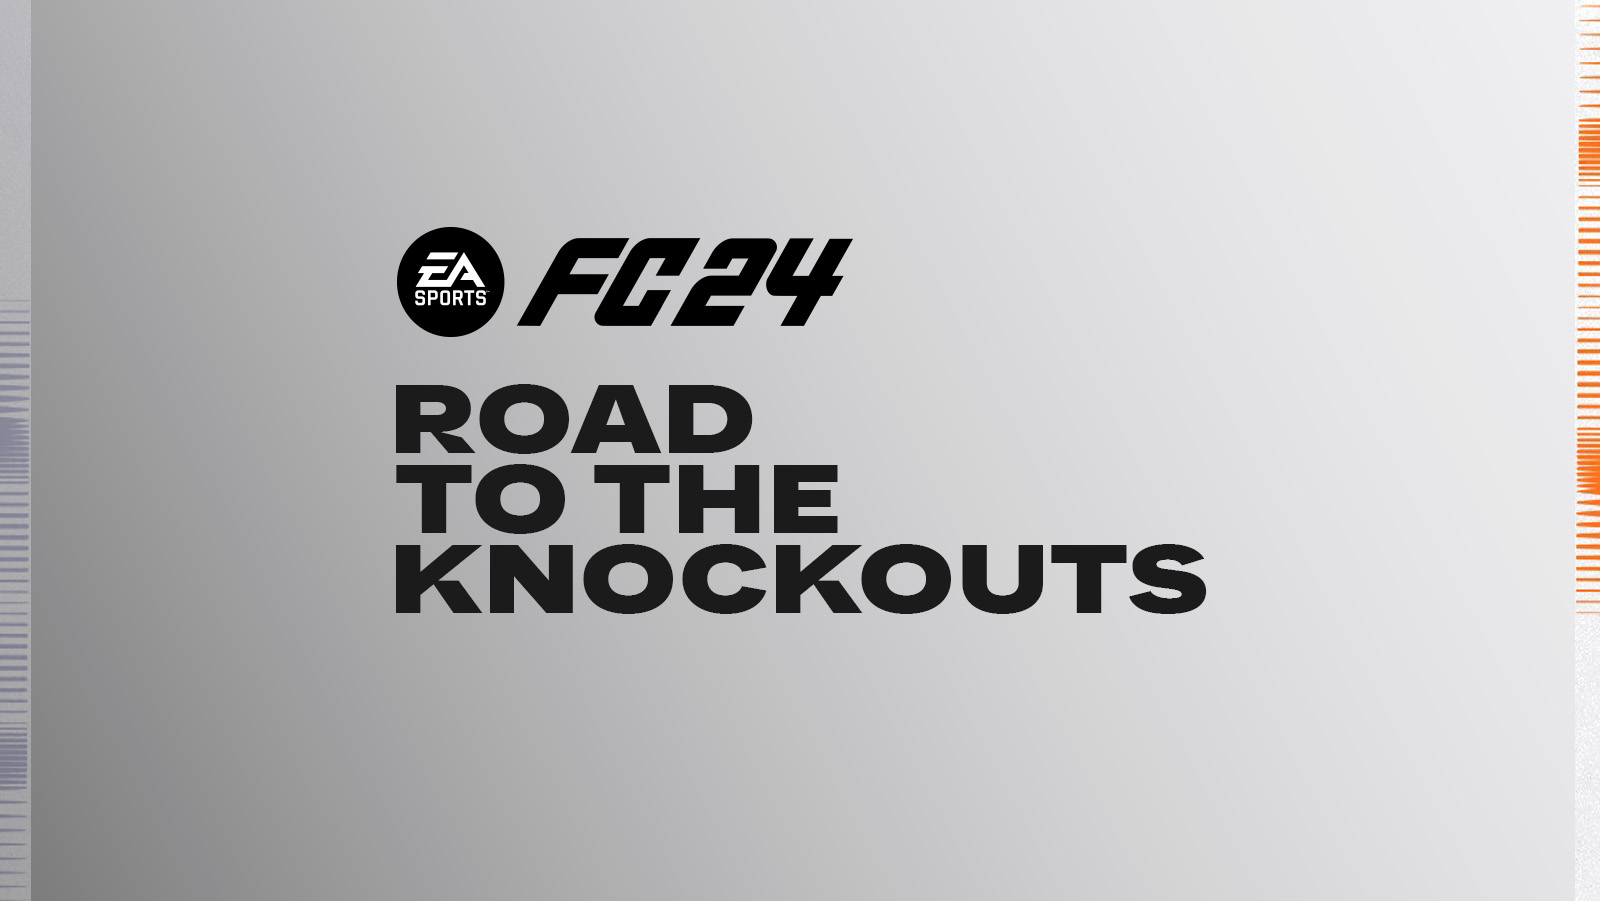 FC 24 Road to the Knockouts (RTTK)